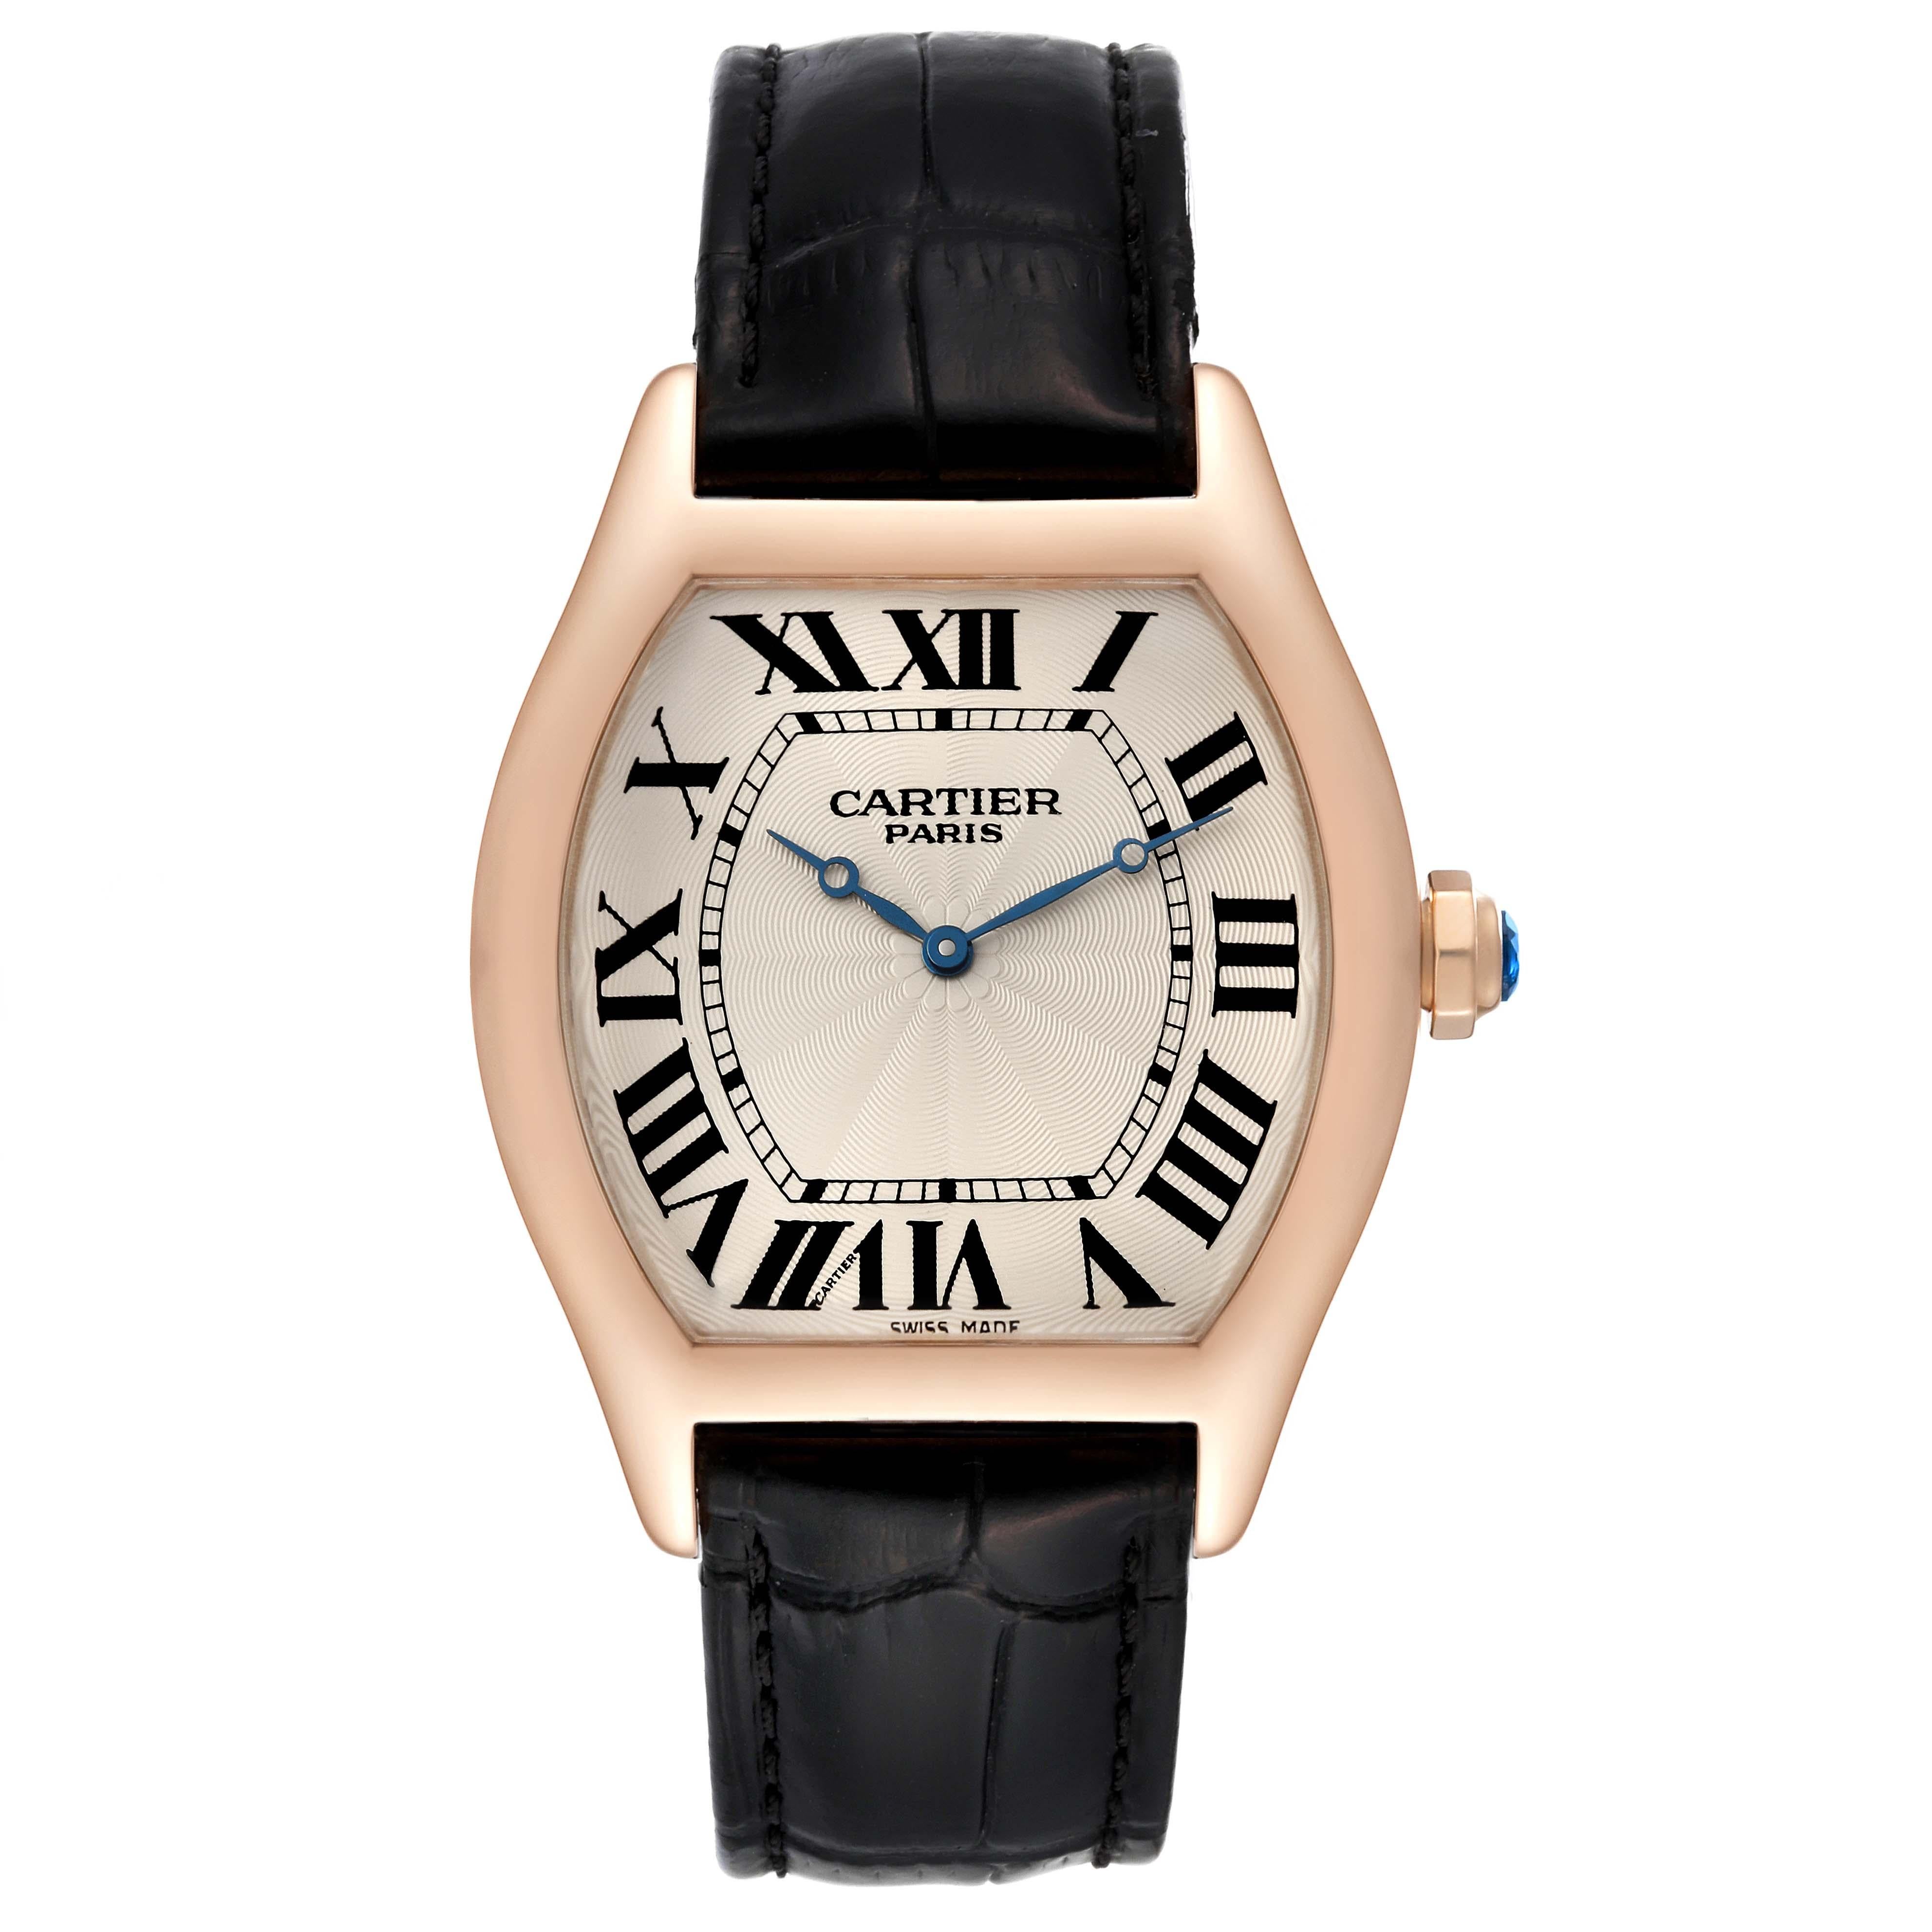 Cartier Tortue XL CPCP Collection Silver Dial Rose Gold Mens Watch 2763. Manual winding movement. 18k rose gold Tonneau shape case 48 mm x 38 mm. Octagonal crown set with a faceted blue sapphire. Transparent exhibition sapphire crystal caseback. .